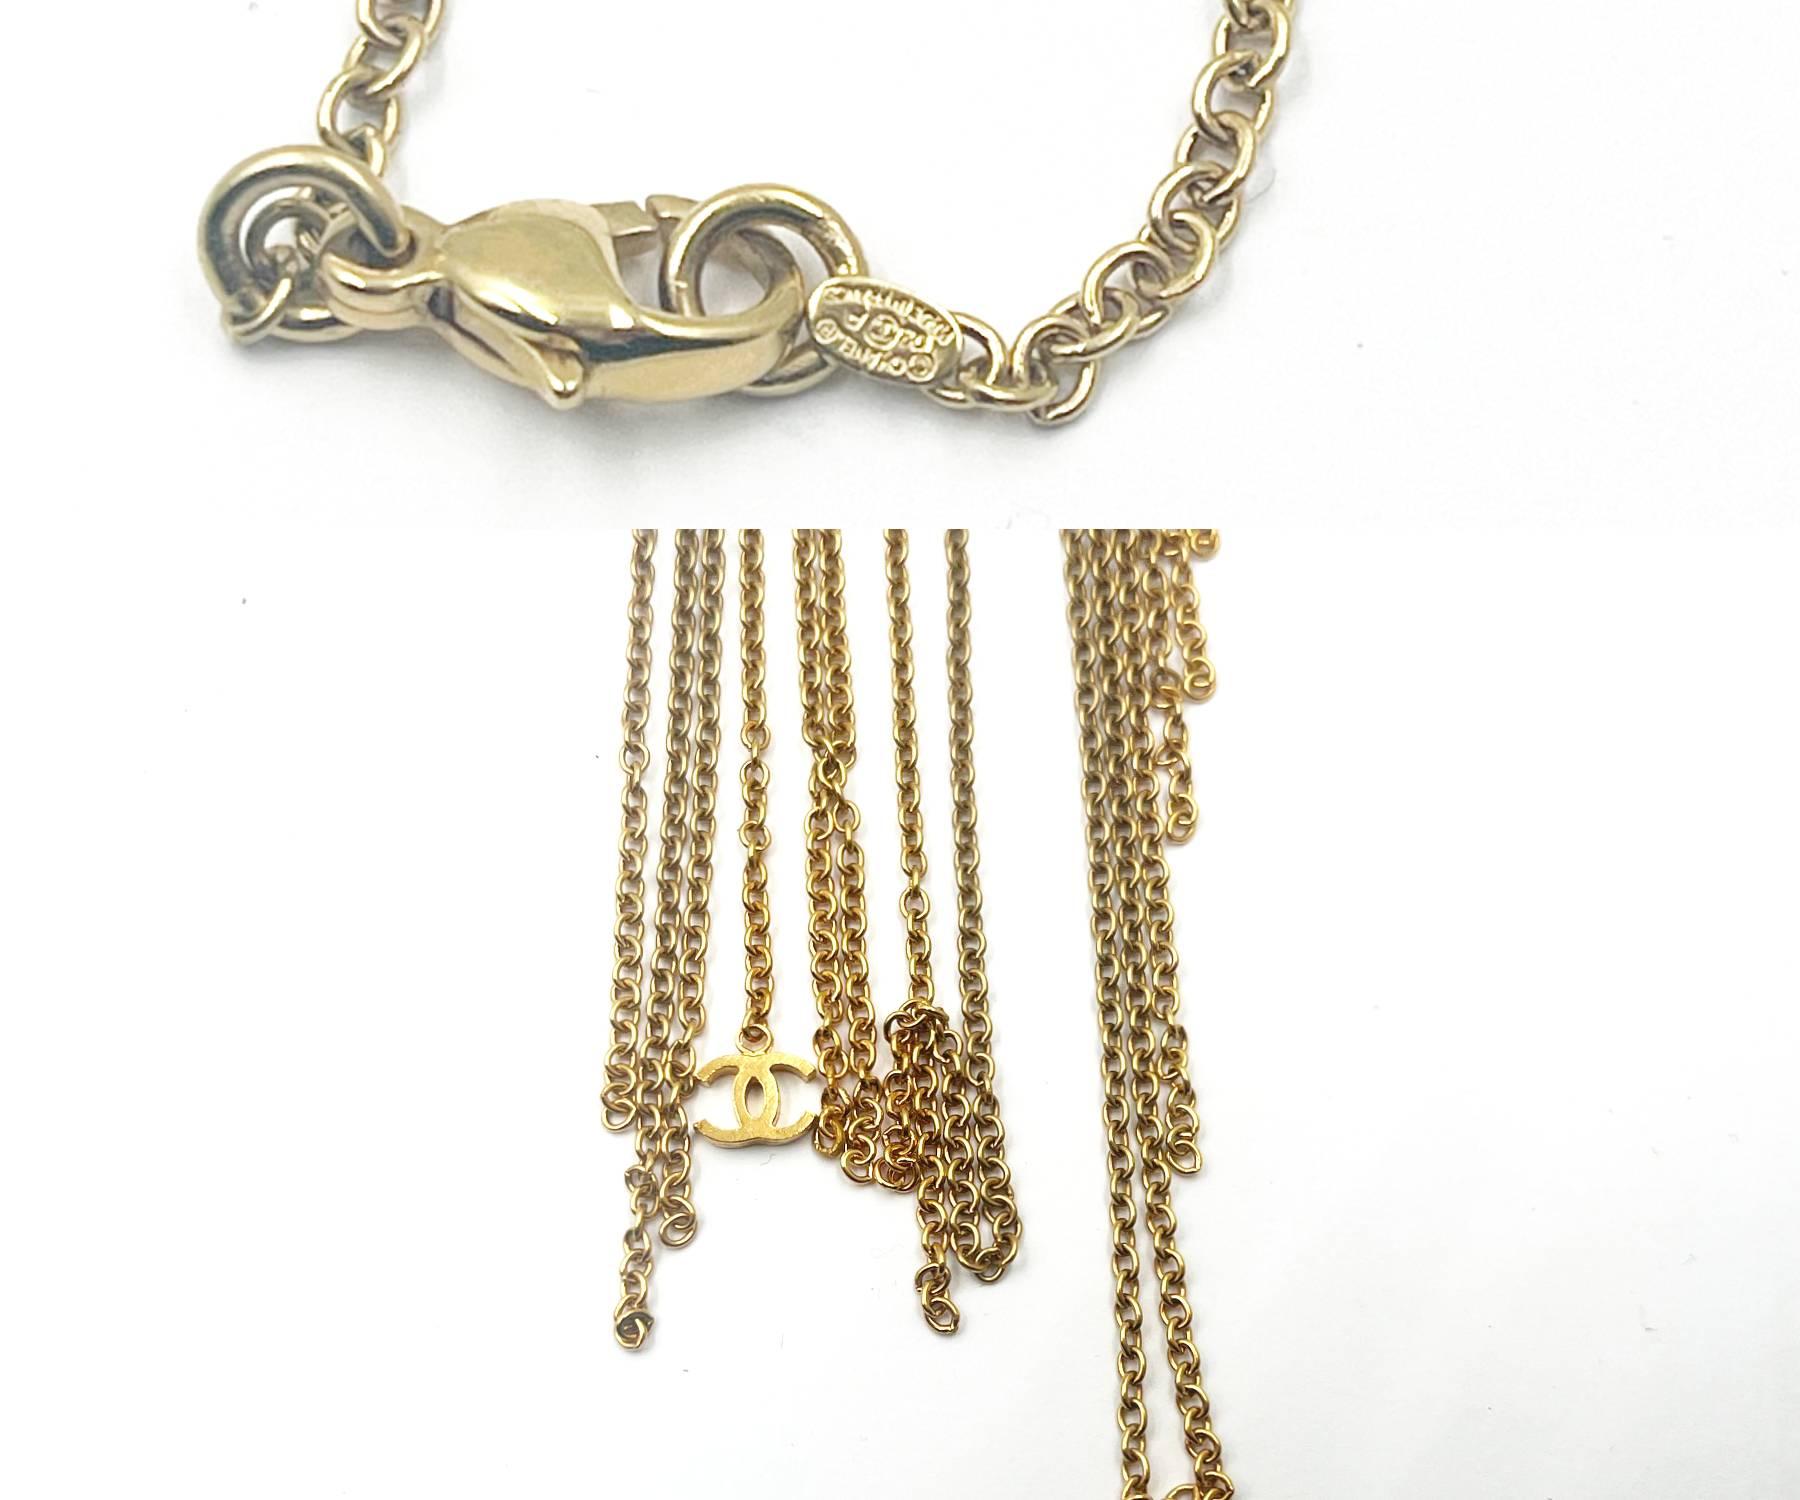 Chanel Vintage Gold Plated Multi Chain CC Bib Choker Necklace In Good Condition For Sale In Pasadena, CA